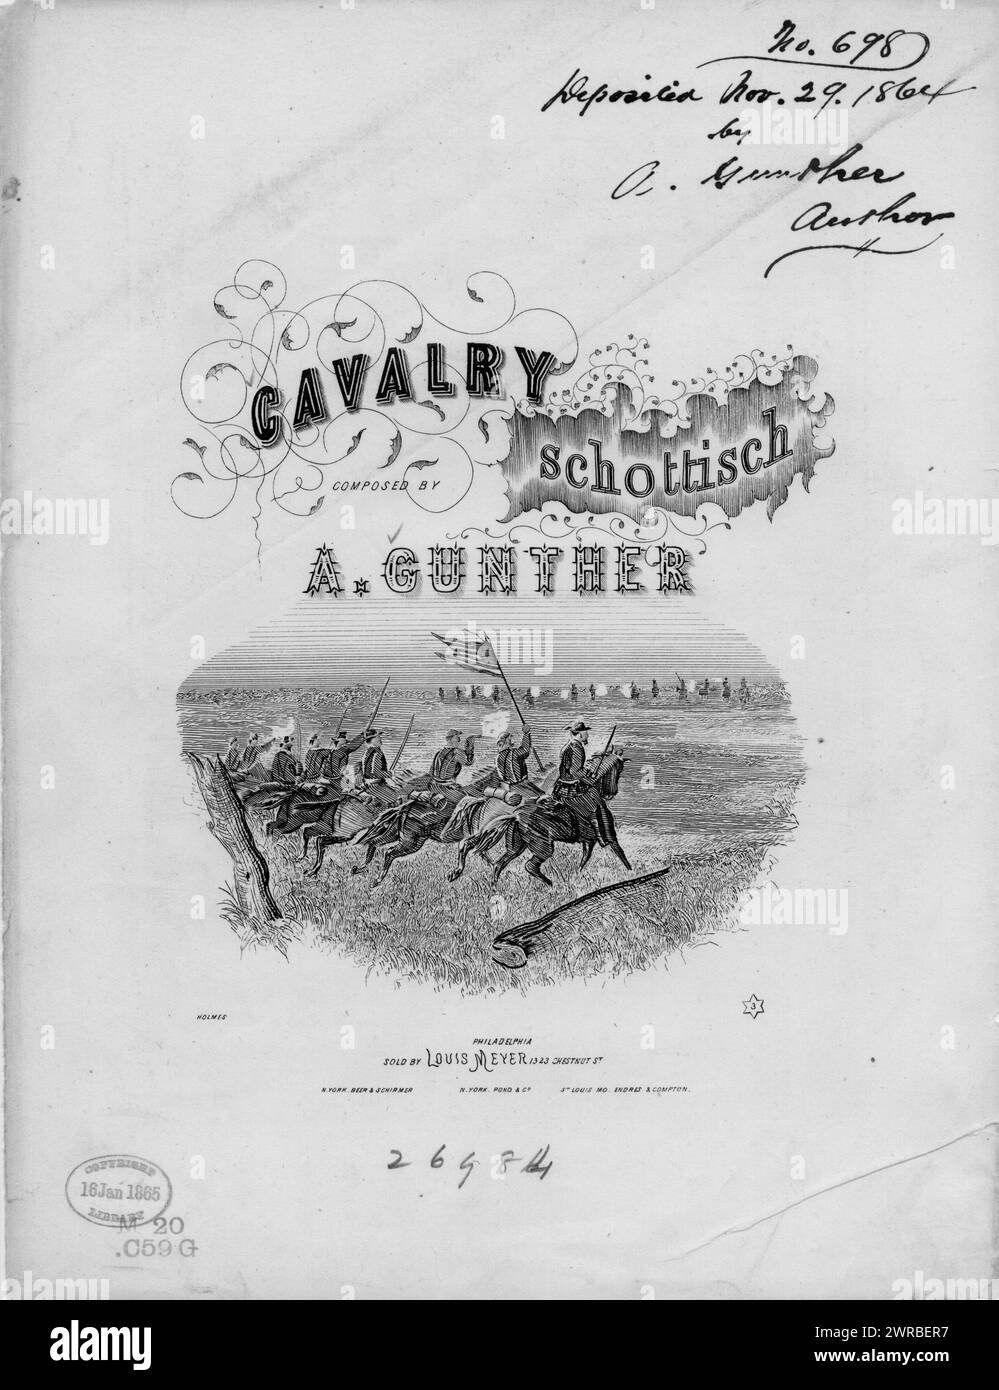 Cavalry schottisch, Gunther, A. (composer), Louis Meyer, Philadelphia, 1864., United States, History, Civil War, 1861-1865, Songs and music Stock Photo